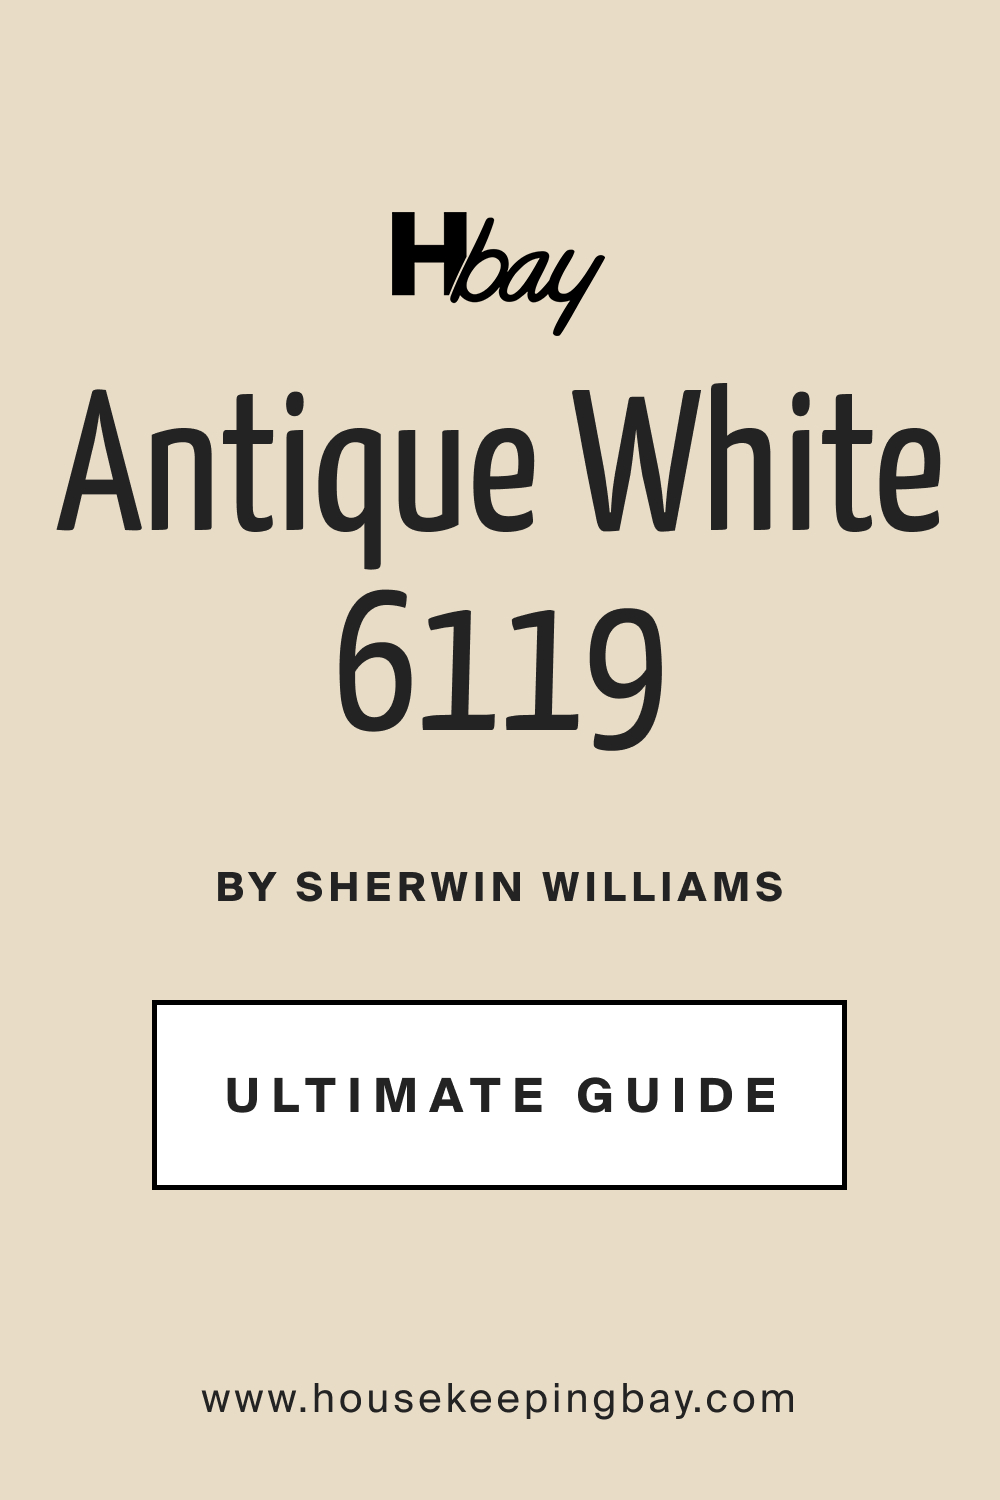 Antique White SW 6119 by Sherwin Williams Ultimate Guide